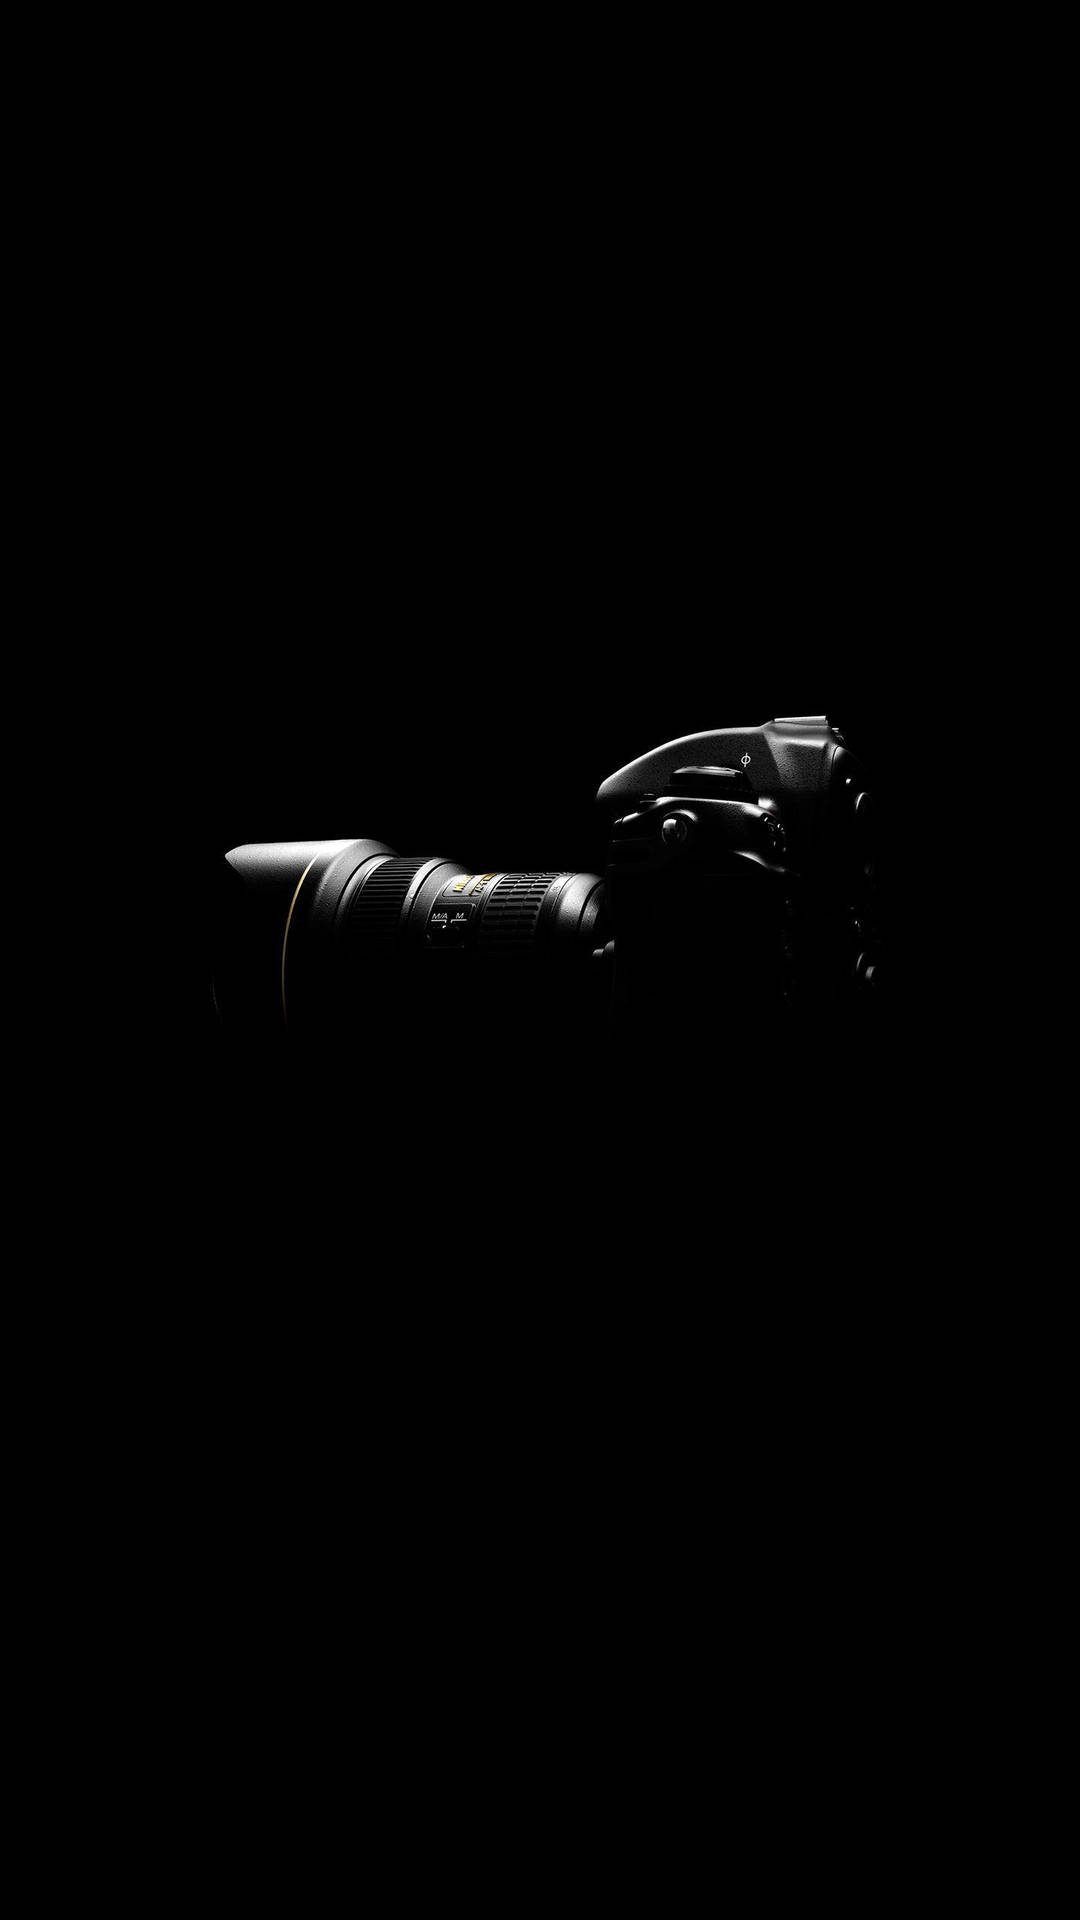 Classic Camera Silhouette on Super Amoled Background Wallpaper